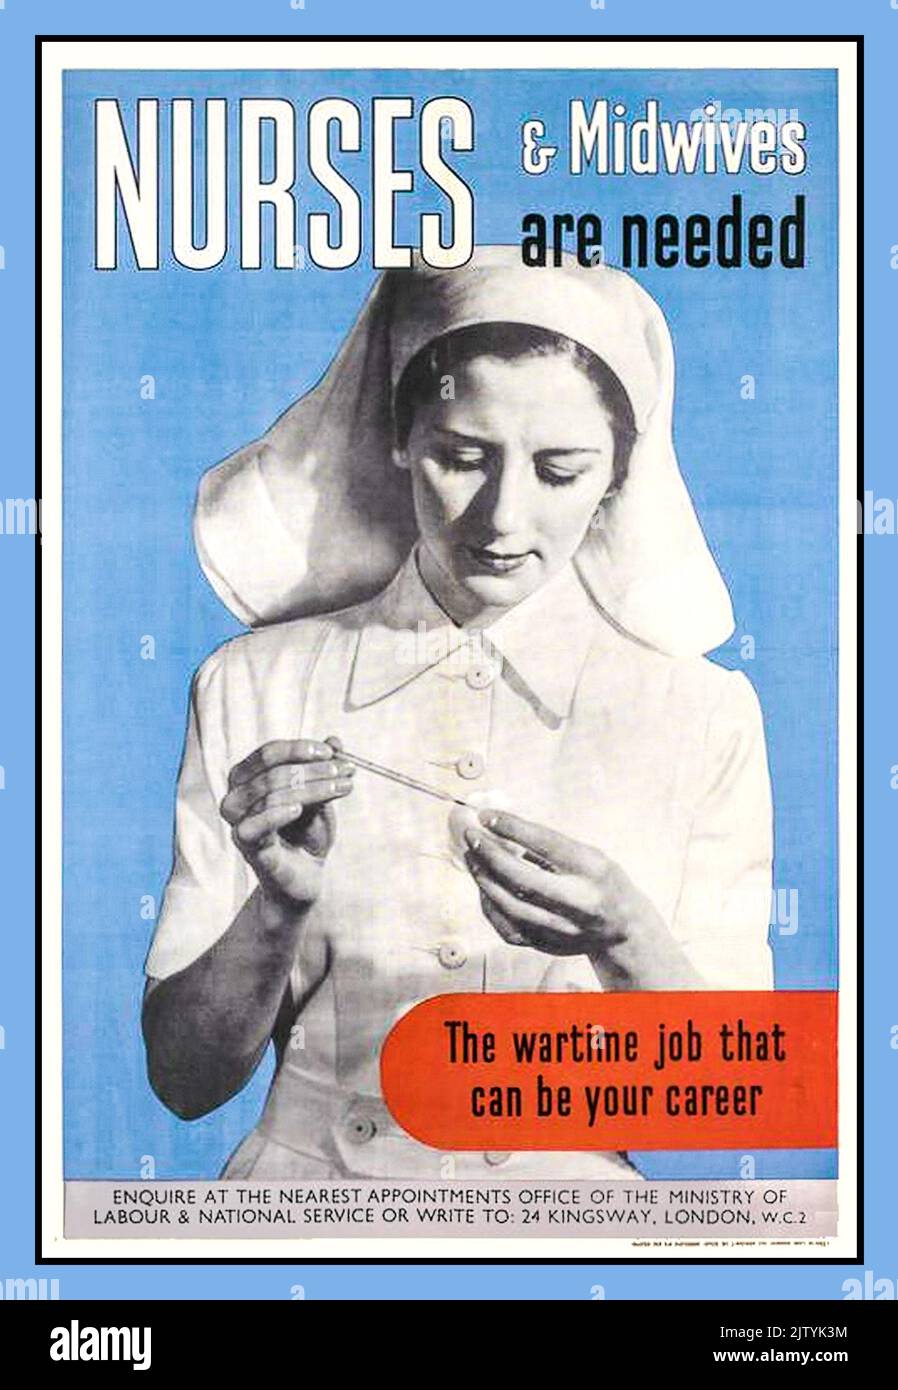 NURSE WW2 1939 UK Nurse Recruitment Poster 'Nurses & Midwives are Needed'  'The wartime job that can be your career' Civilian health occupation recruitment during the Second World War. World War II Stock Photo